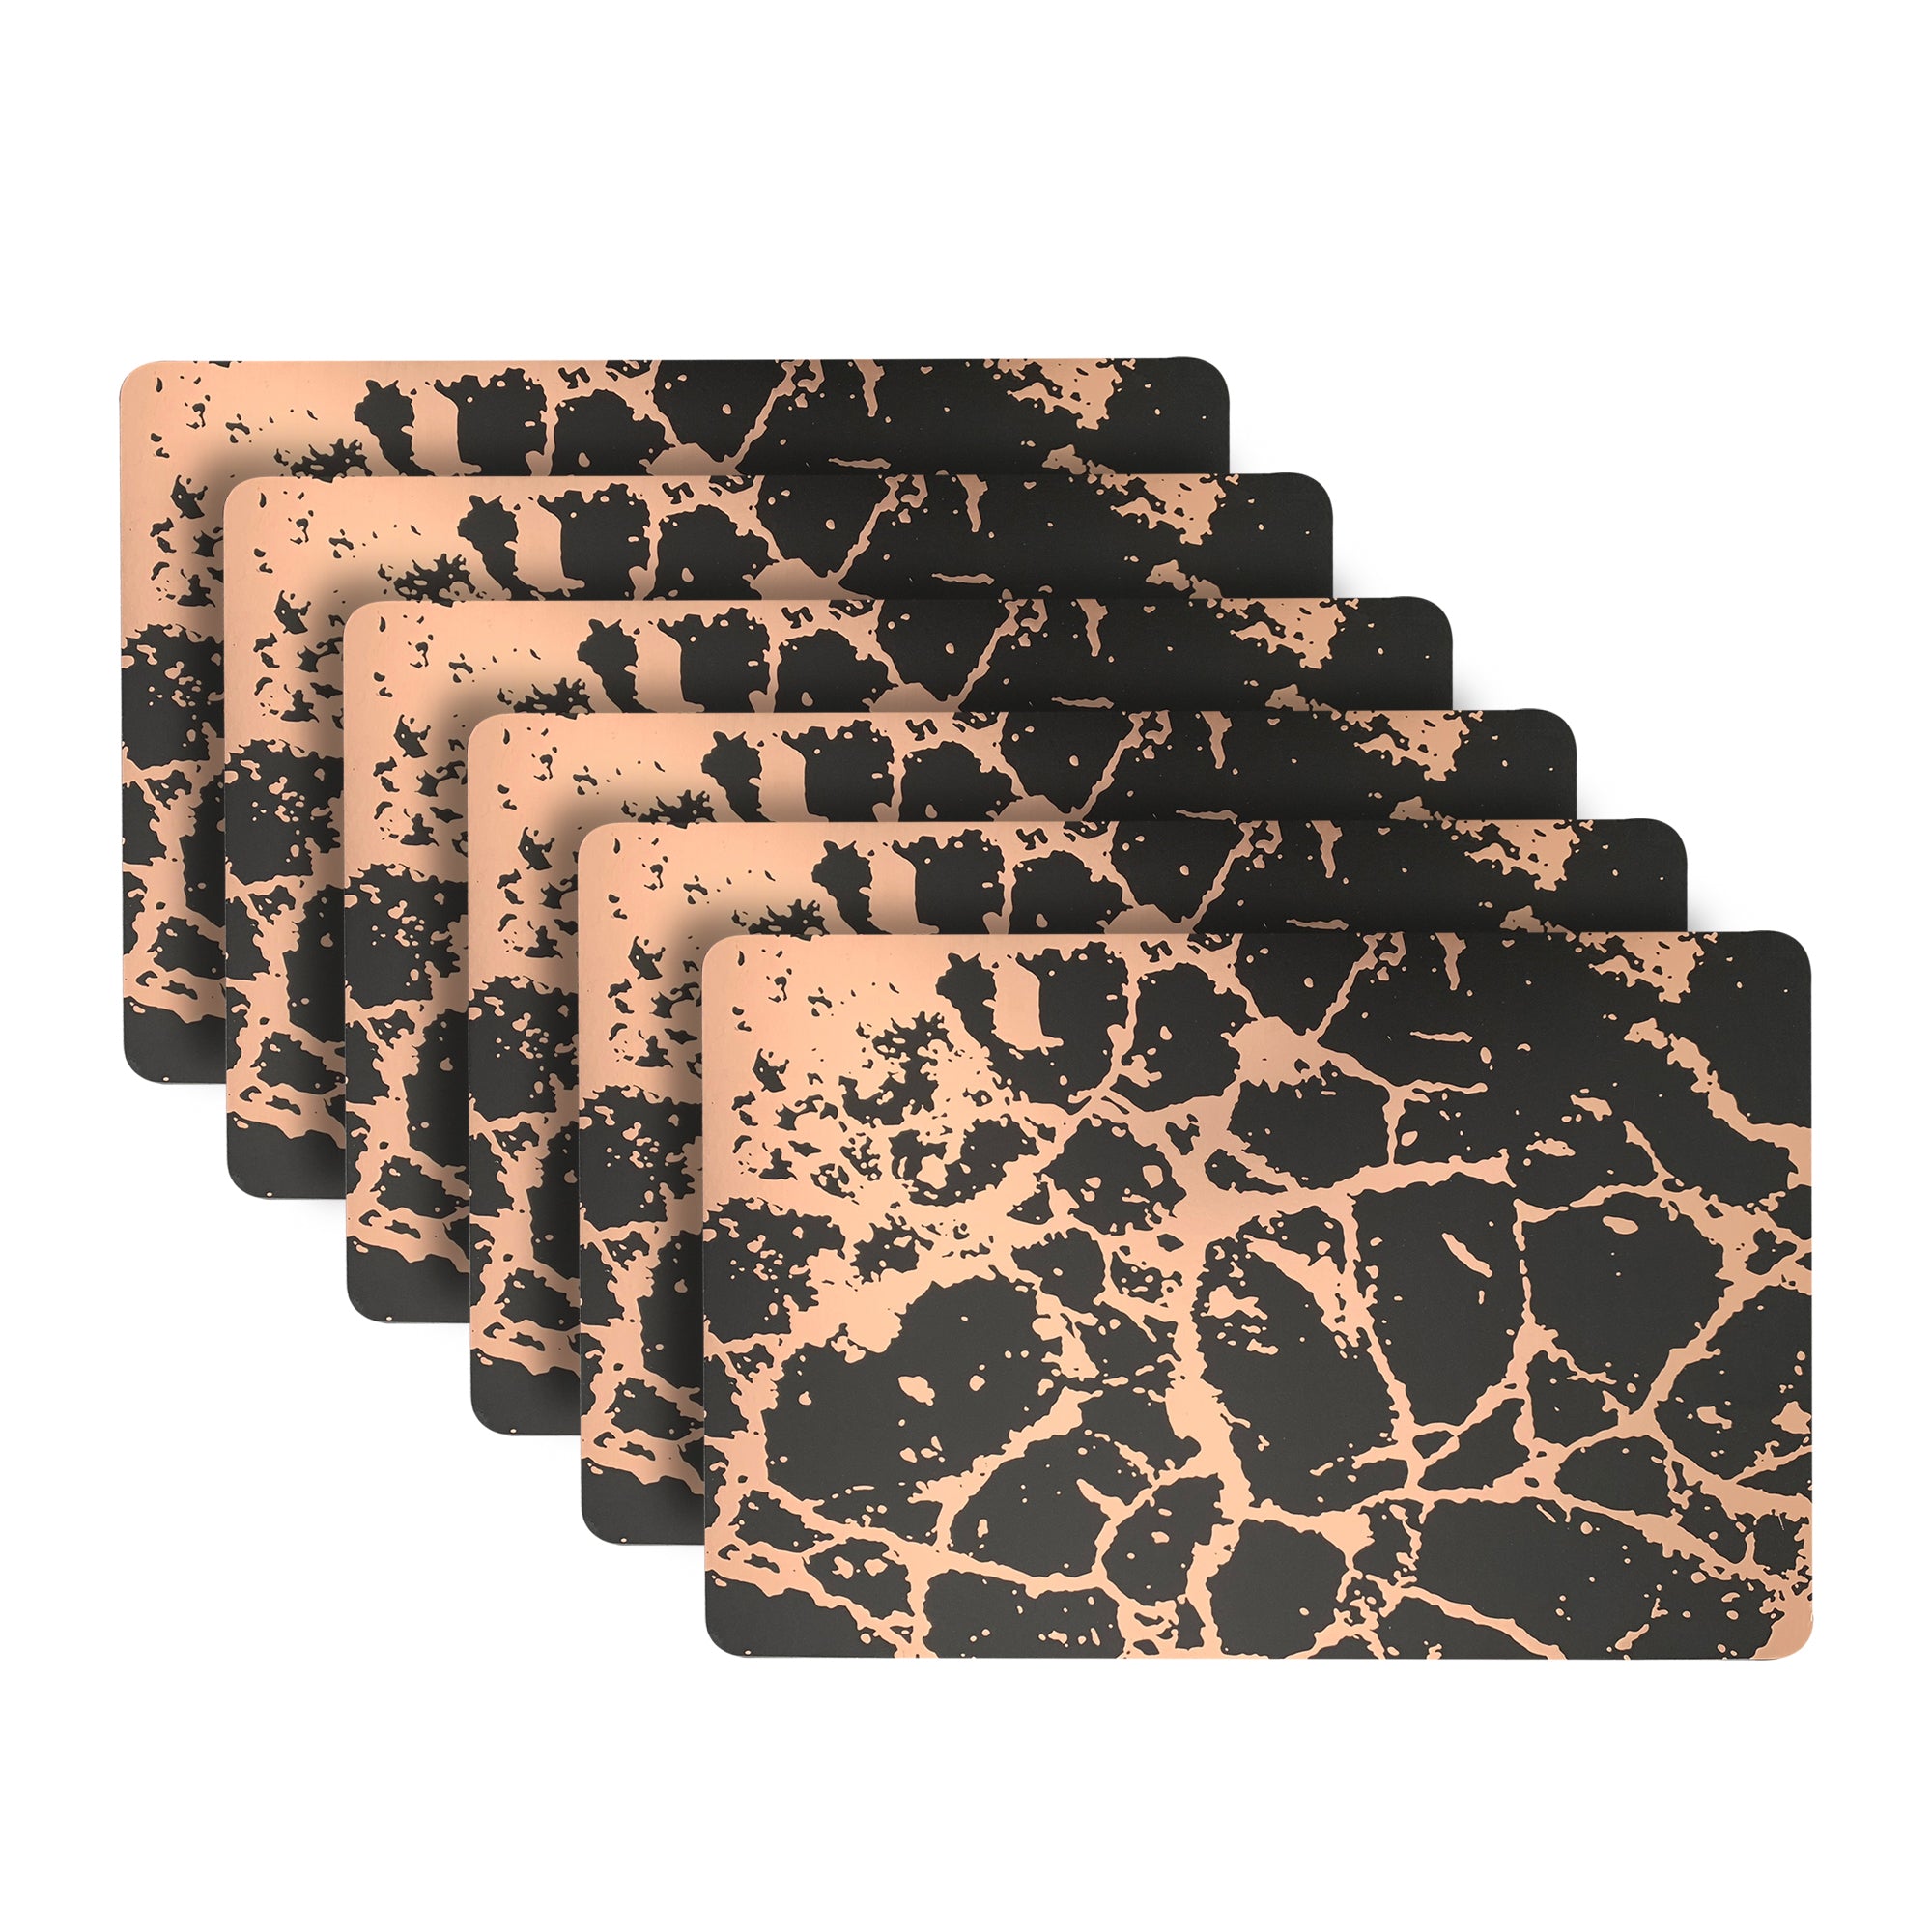 Dainty Home Marble Cork Foil Printed Marble Granite Designed Thick Cork Textured 12" x 18" Rectangular Placemats